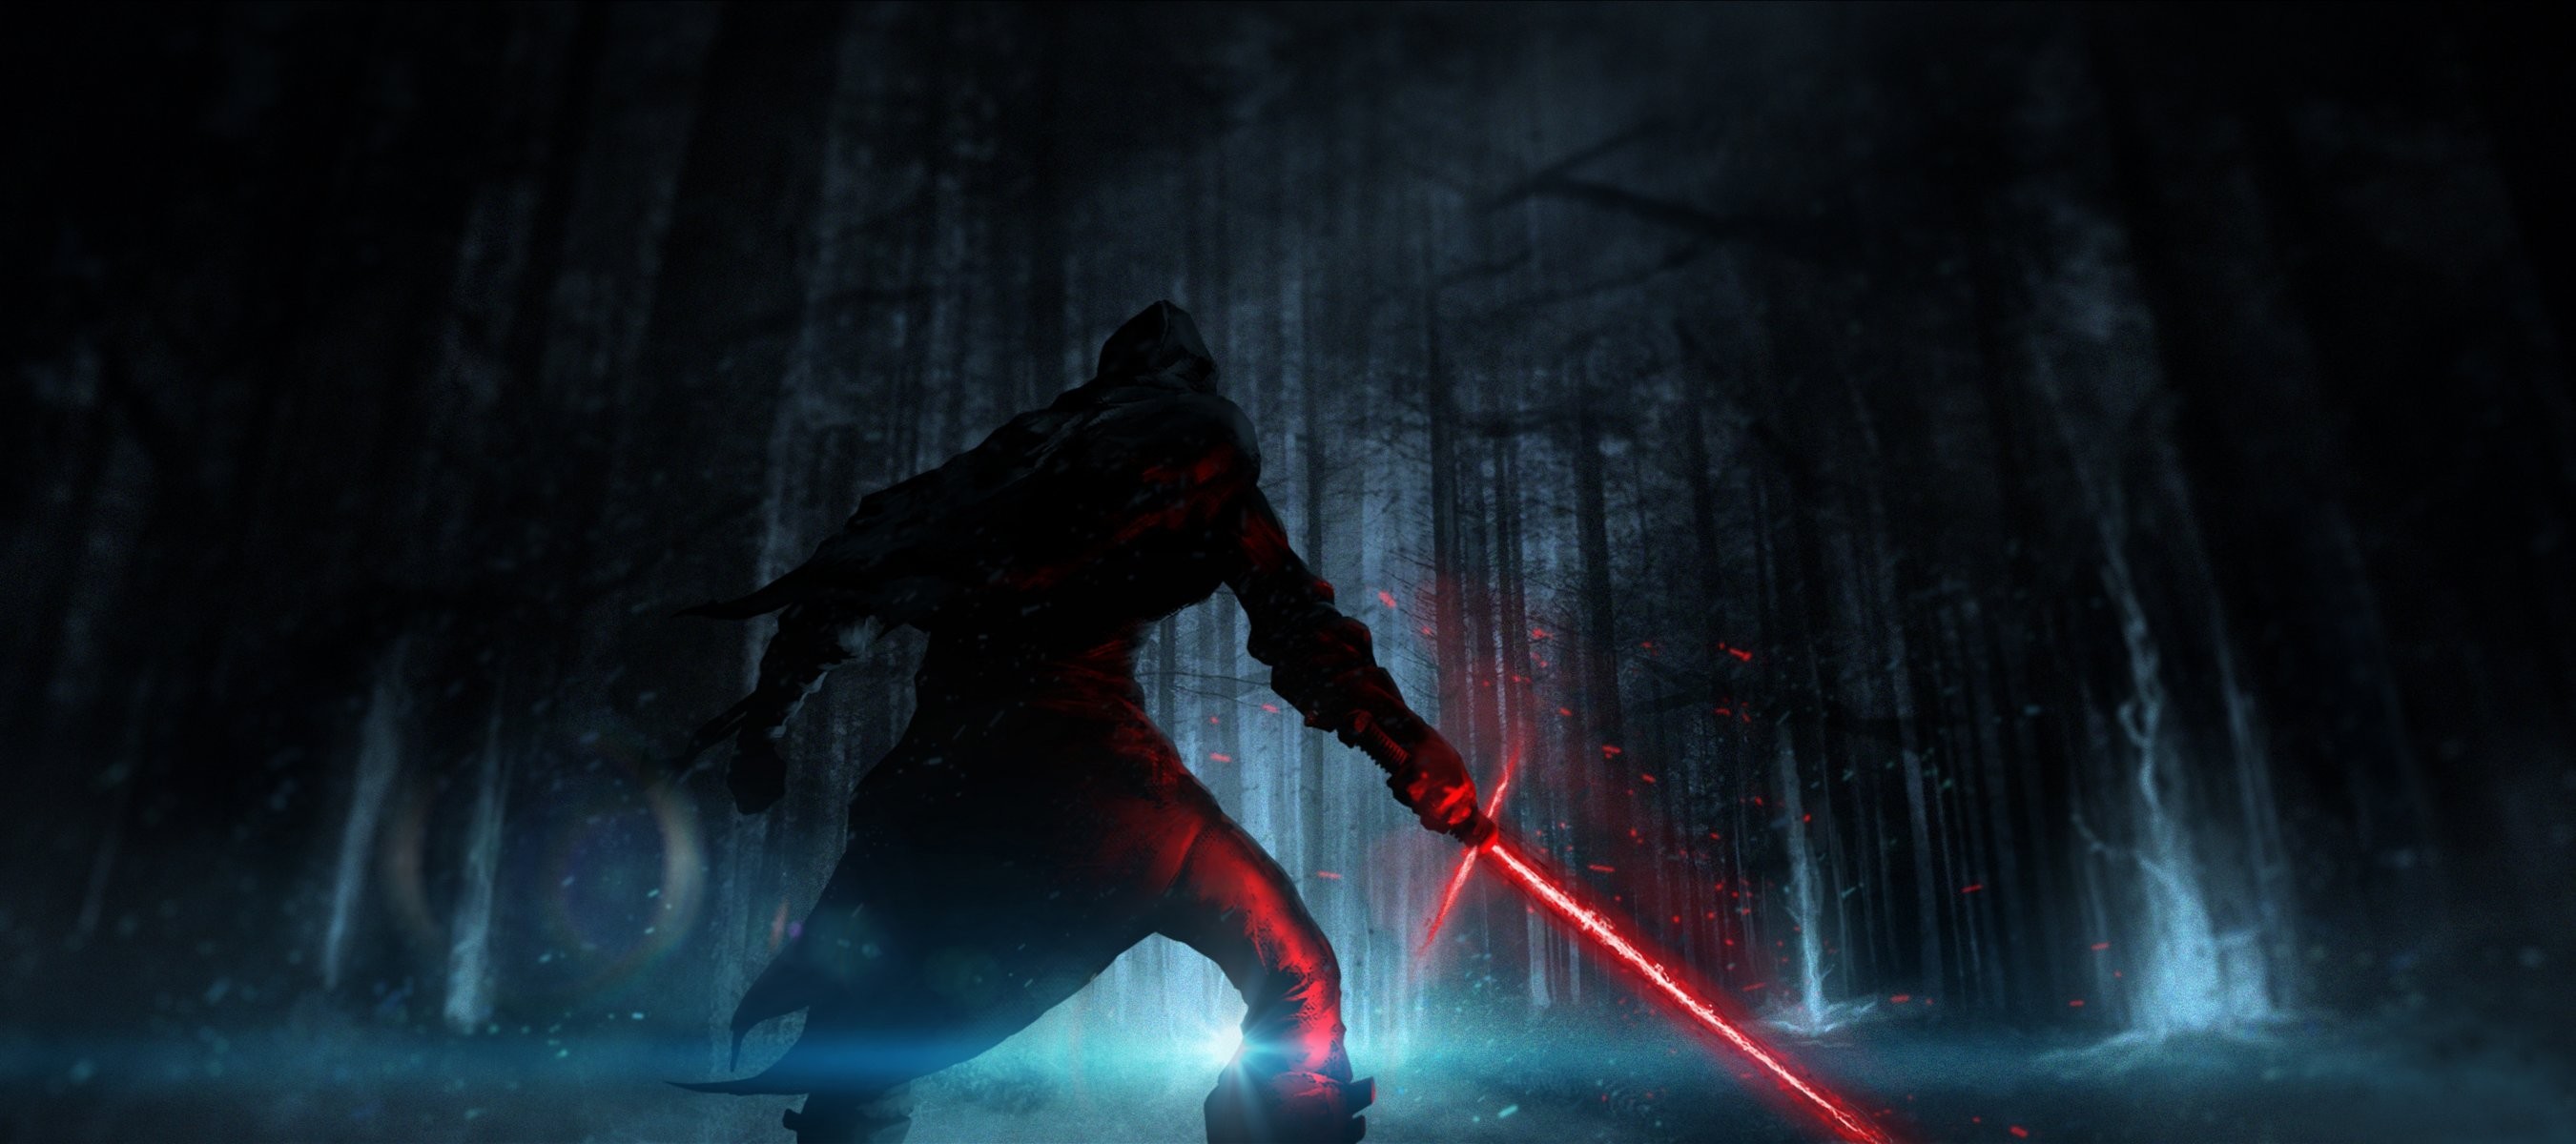 2701x1200 star wars the force awakens forest sith art star wars: the force awakens  lightsaber